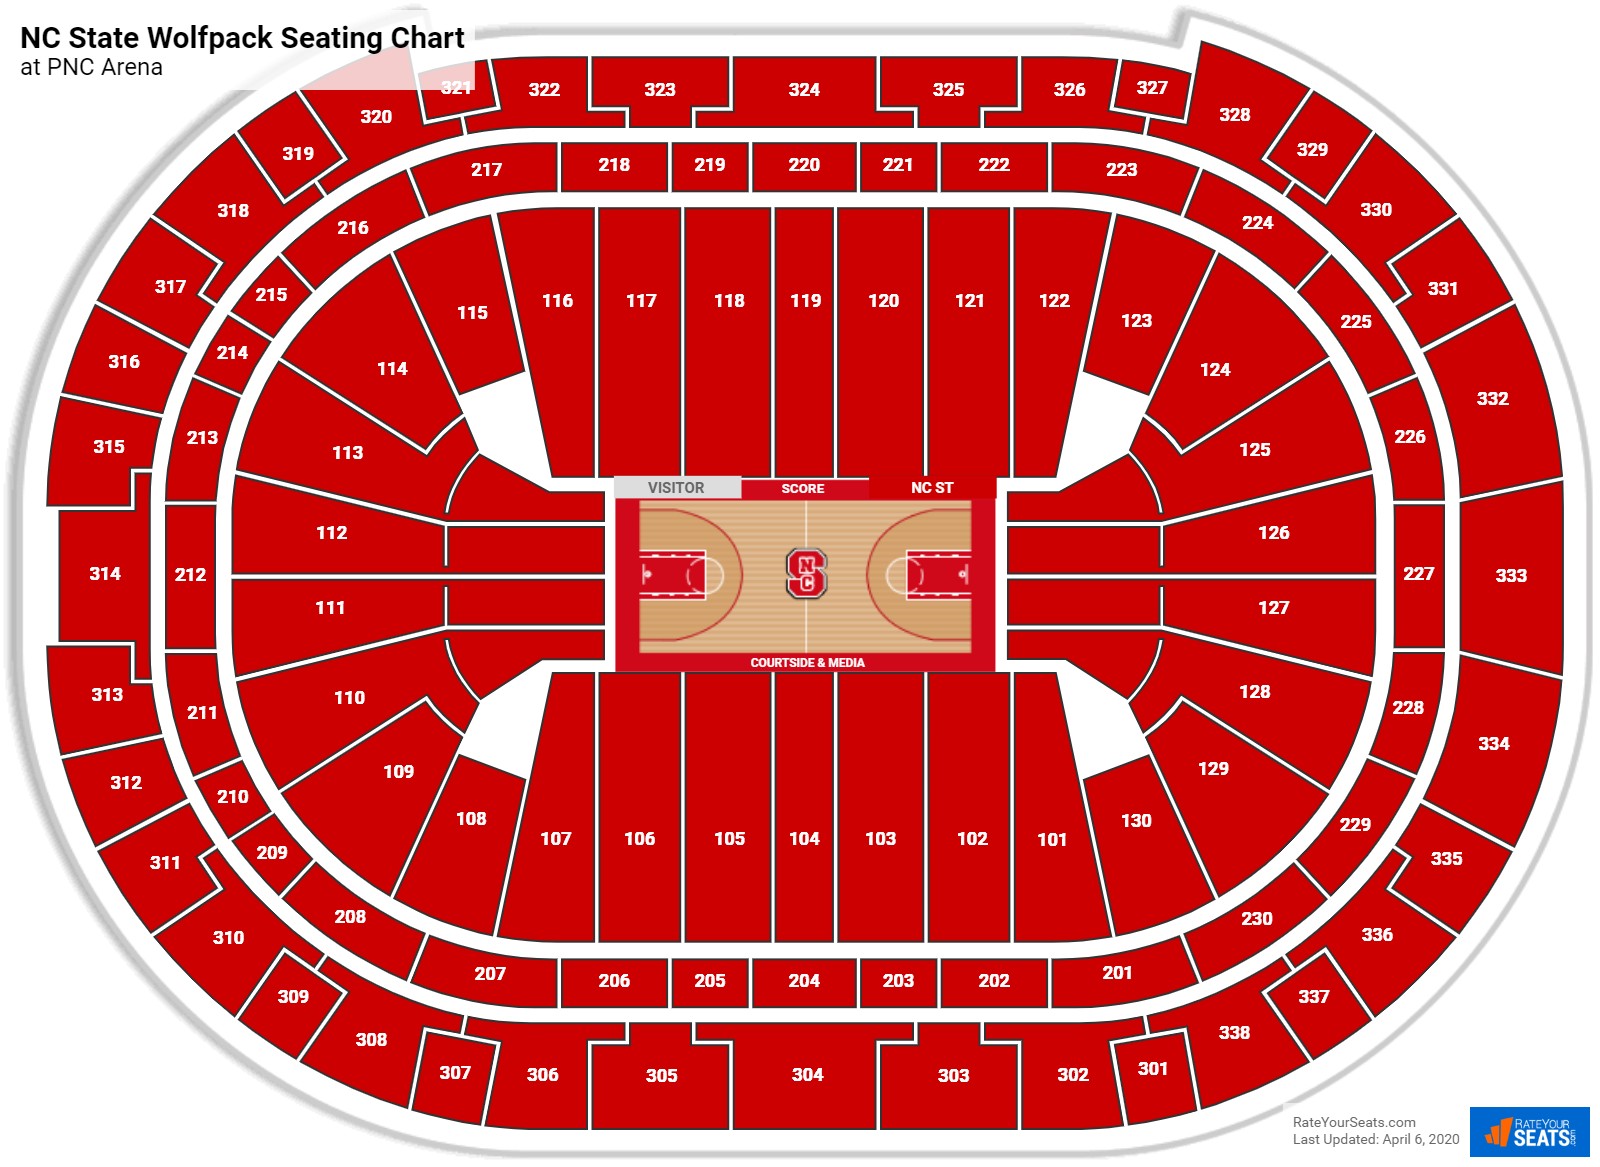 PNC Arena Seating Charts for NC State Basketball - RateYourSeats.com